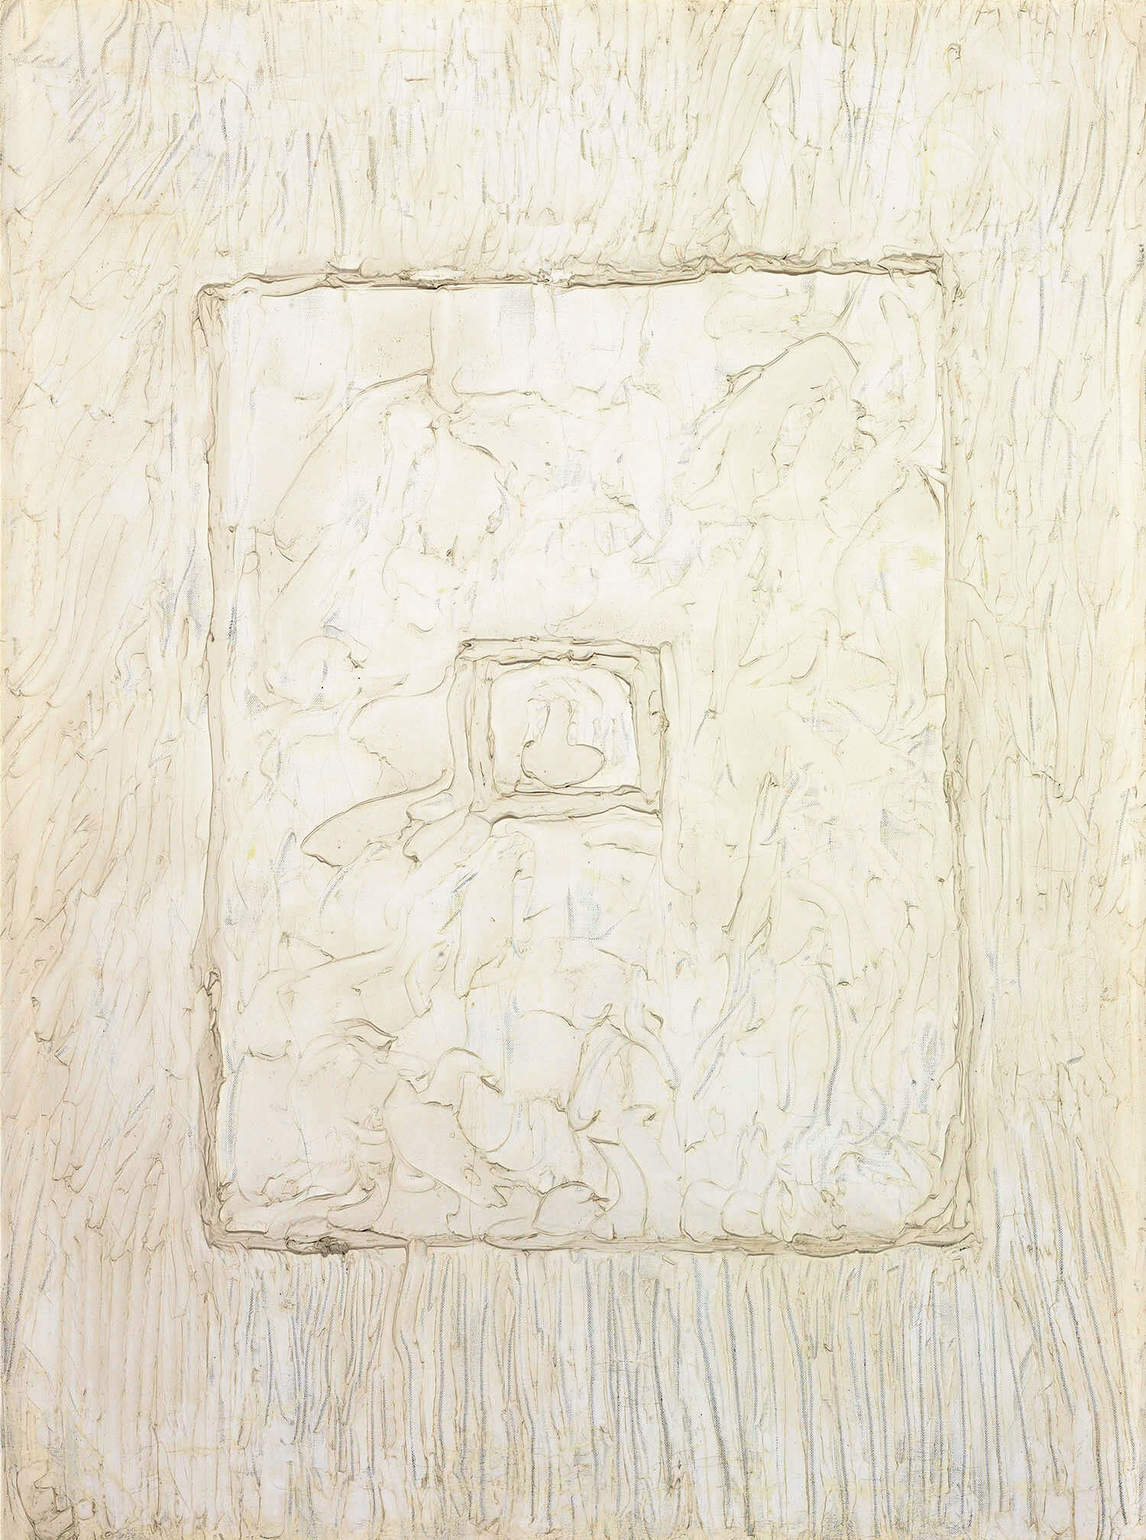 White Abstraction No. 1, c. 1963,